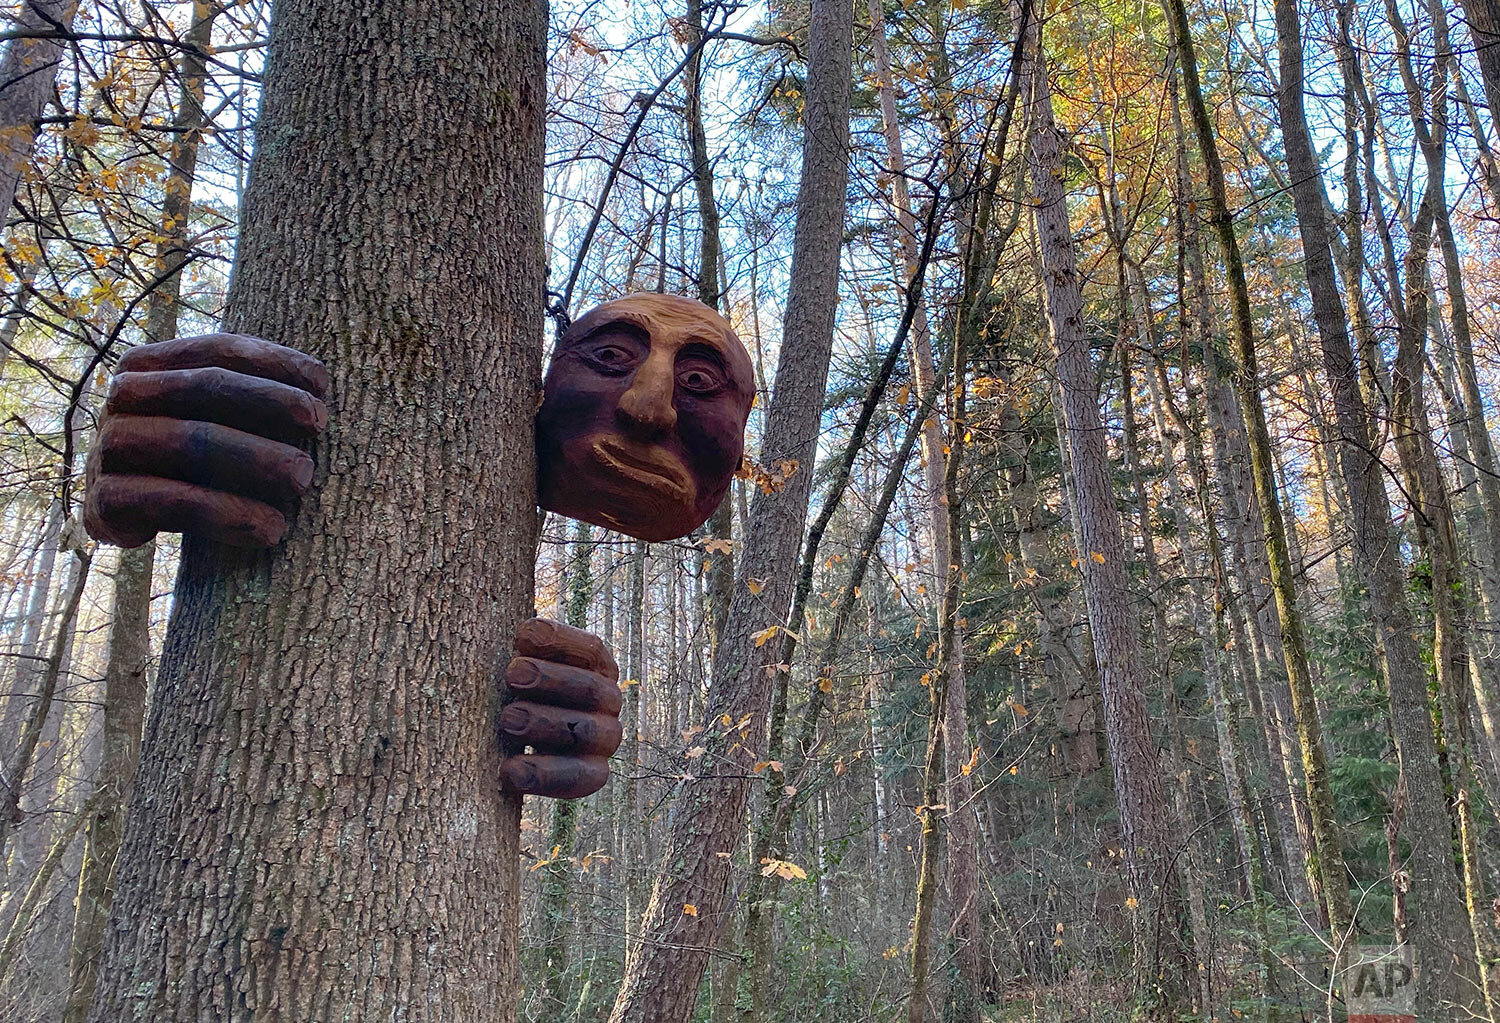  A "friendly giant" sculpture hangs from a tree in the Hanmer Heritage Forest at Hammer Springs, New Zealand, Sunday, June 14, 2020.  (AP Photo/Mark Baker) 